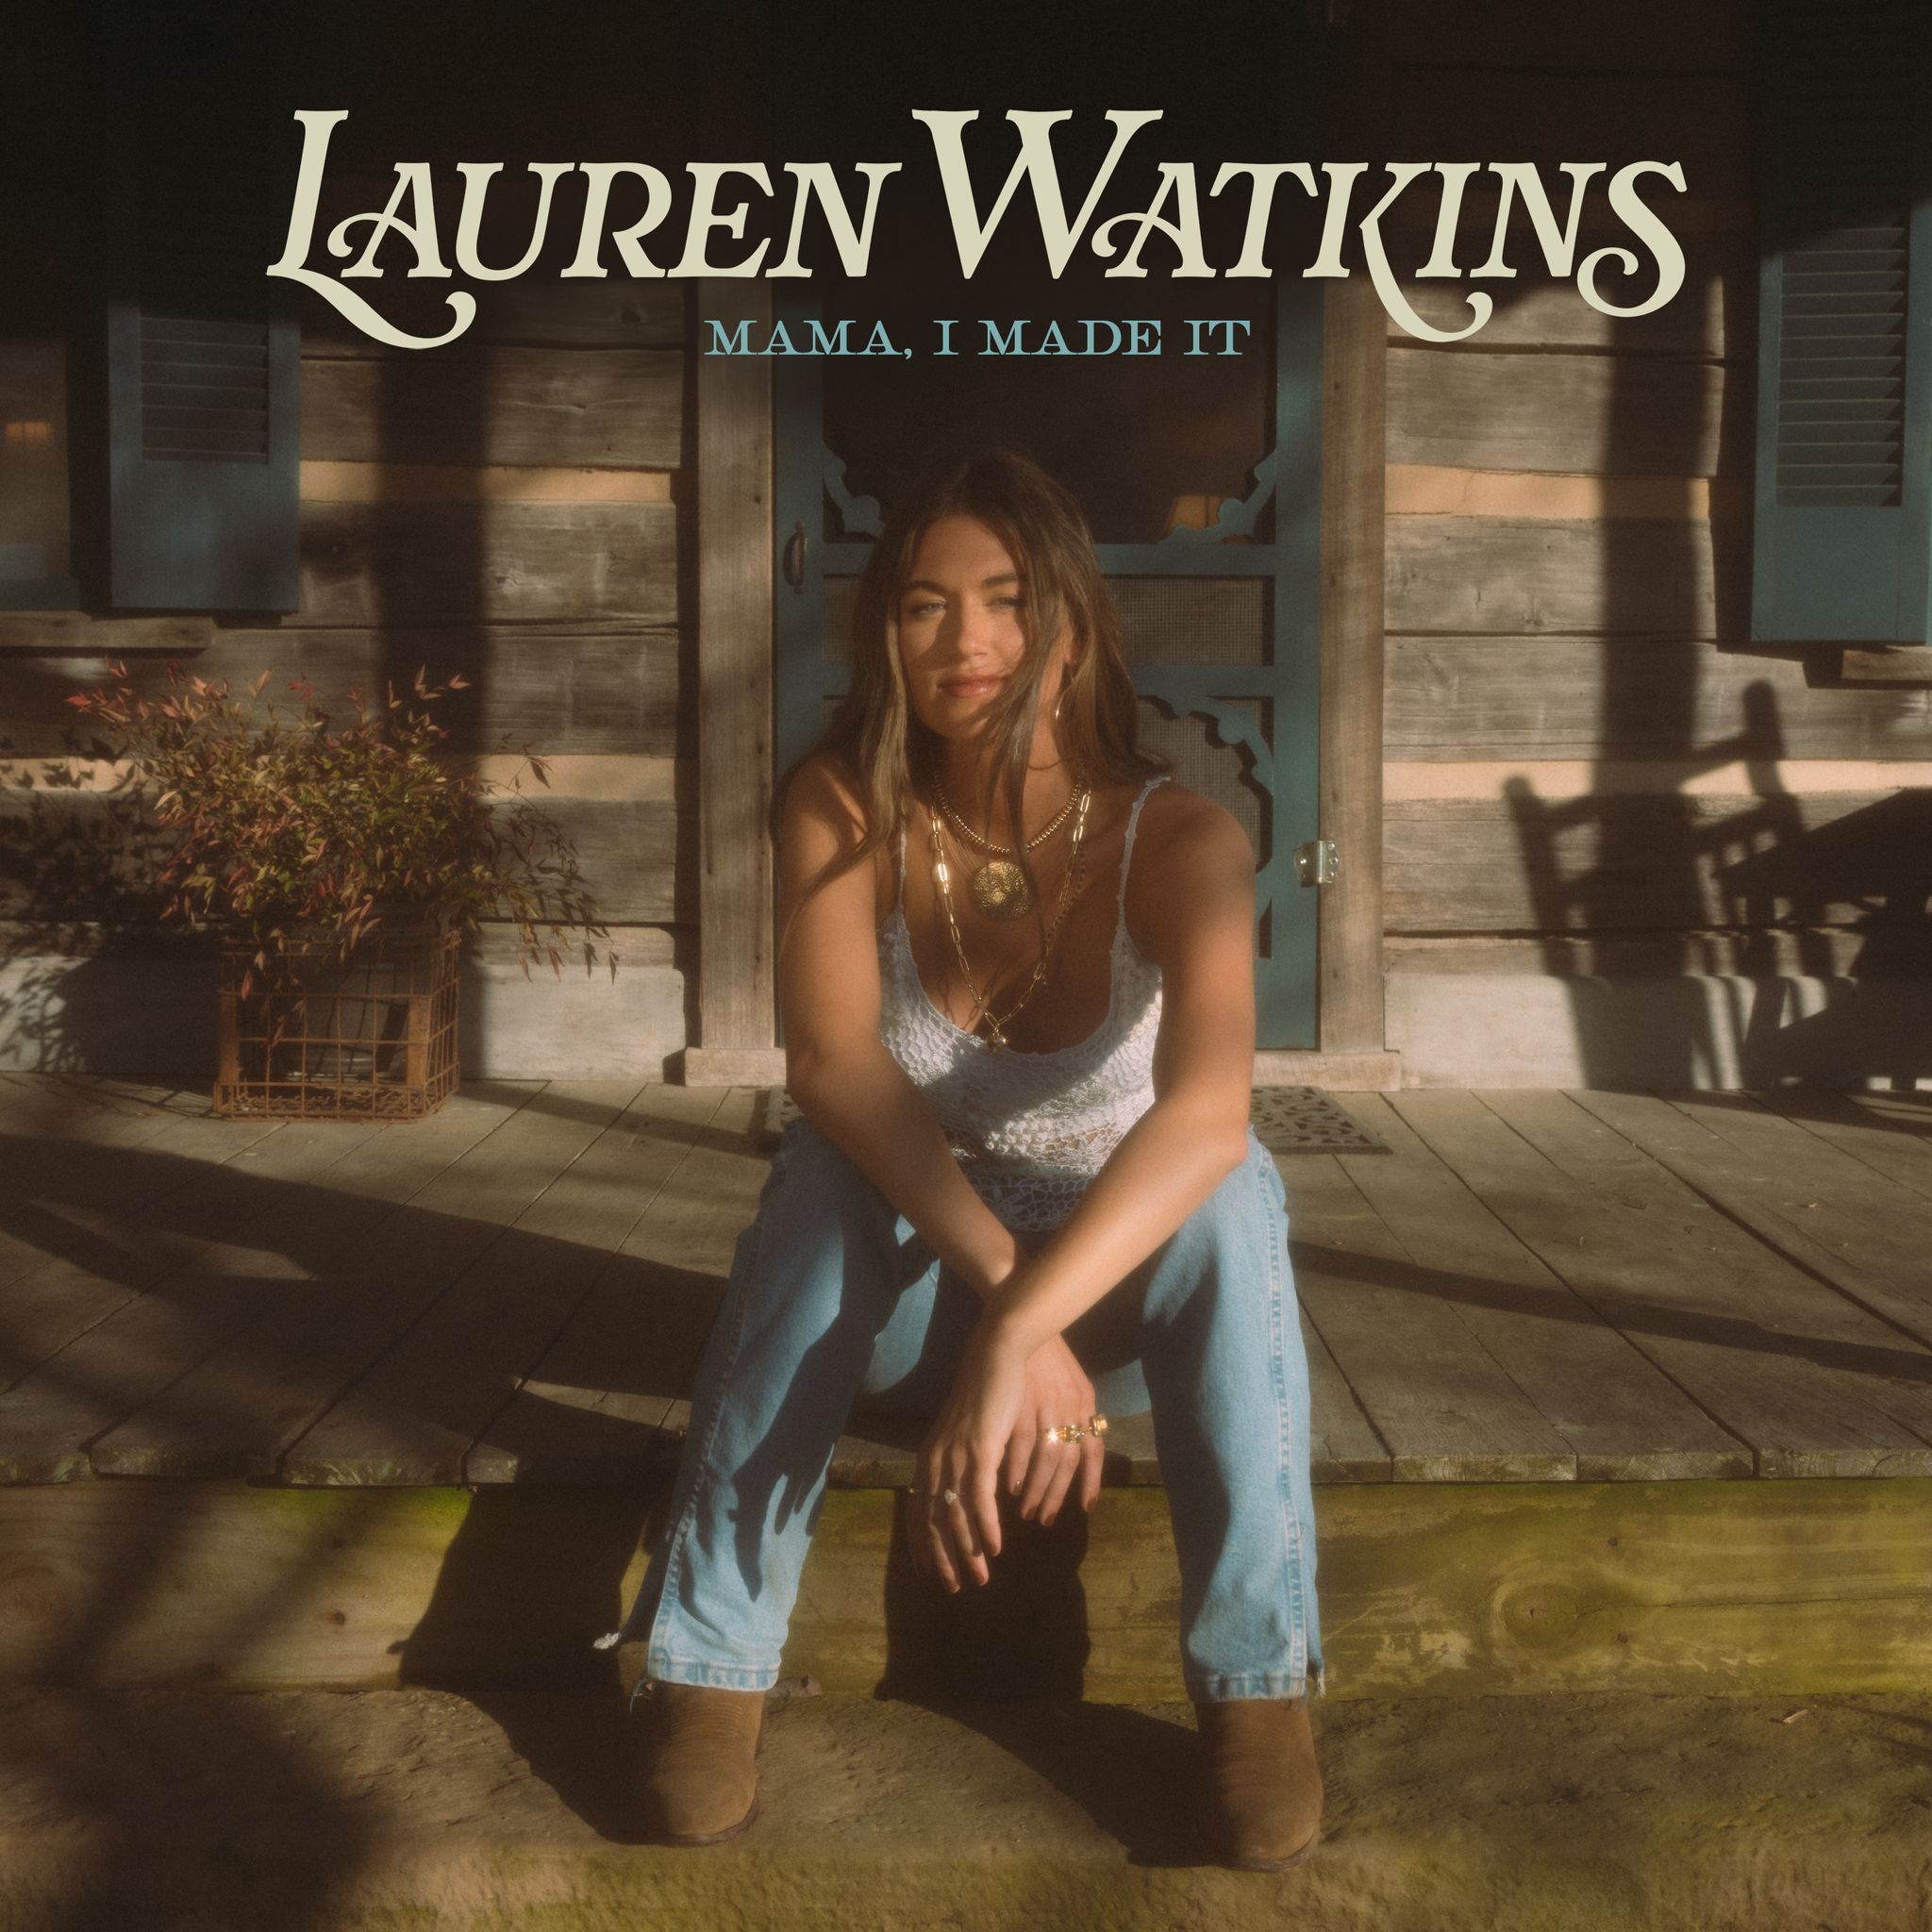 “MAMA, I MADE IT” – LAUREN WATKINS ARRIVES WITH NEW SONG